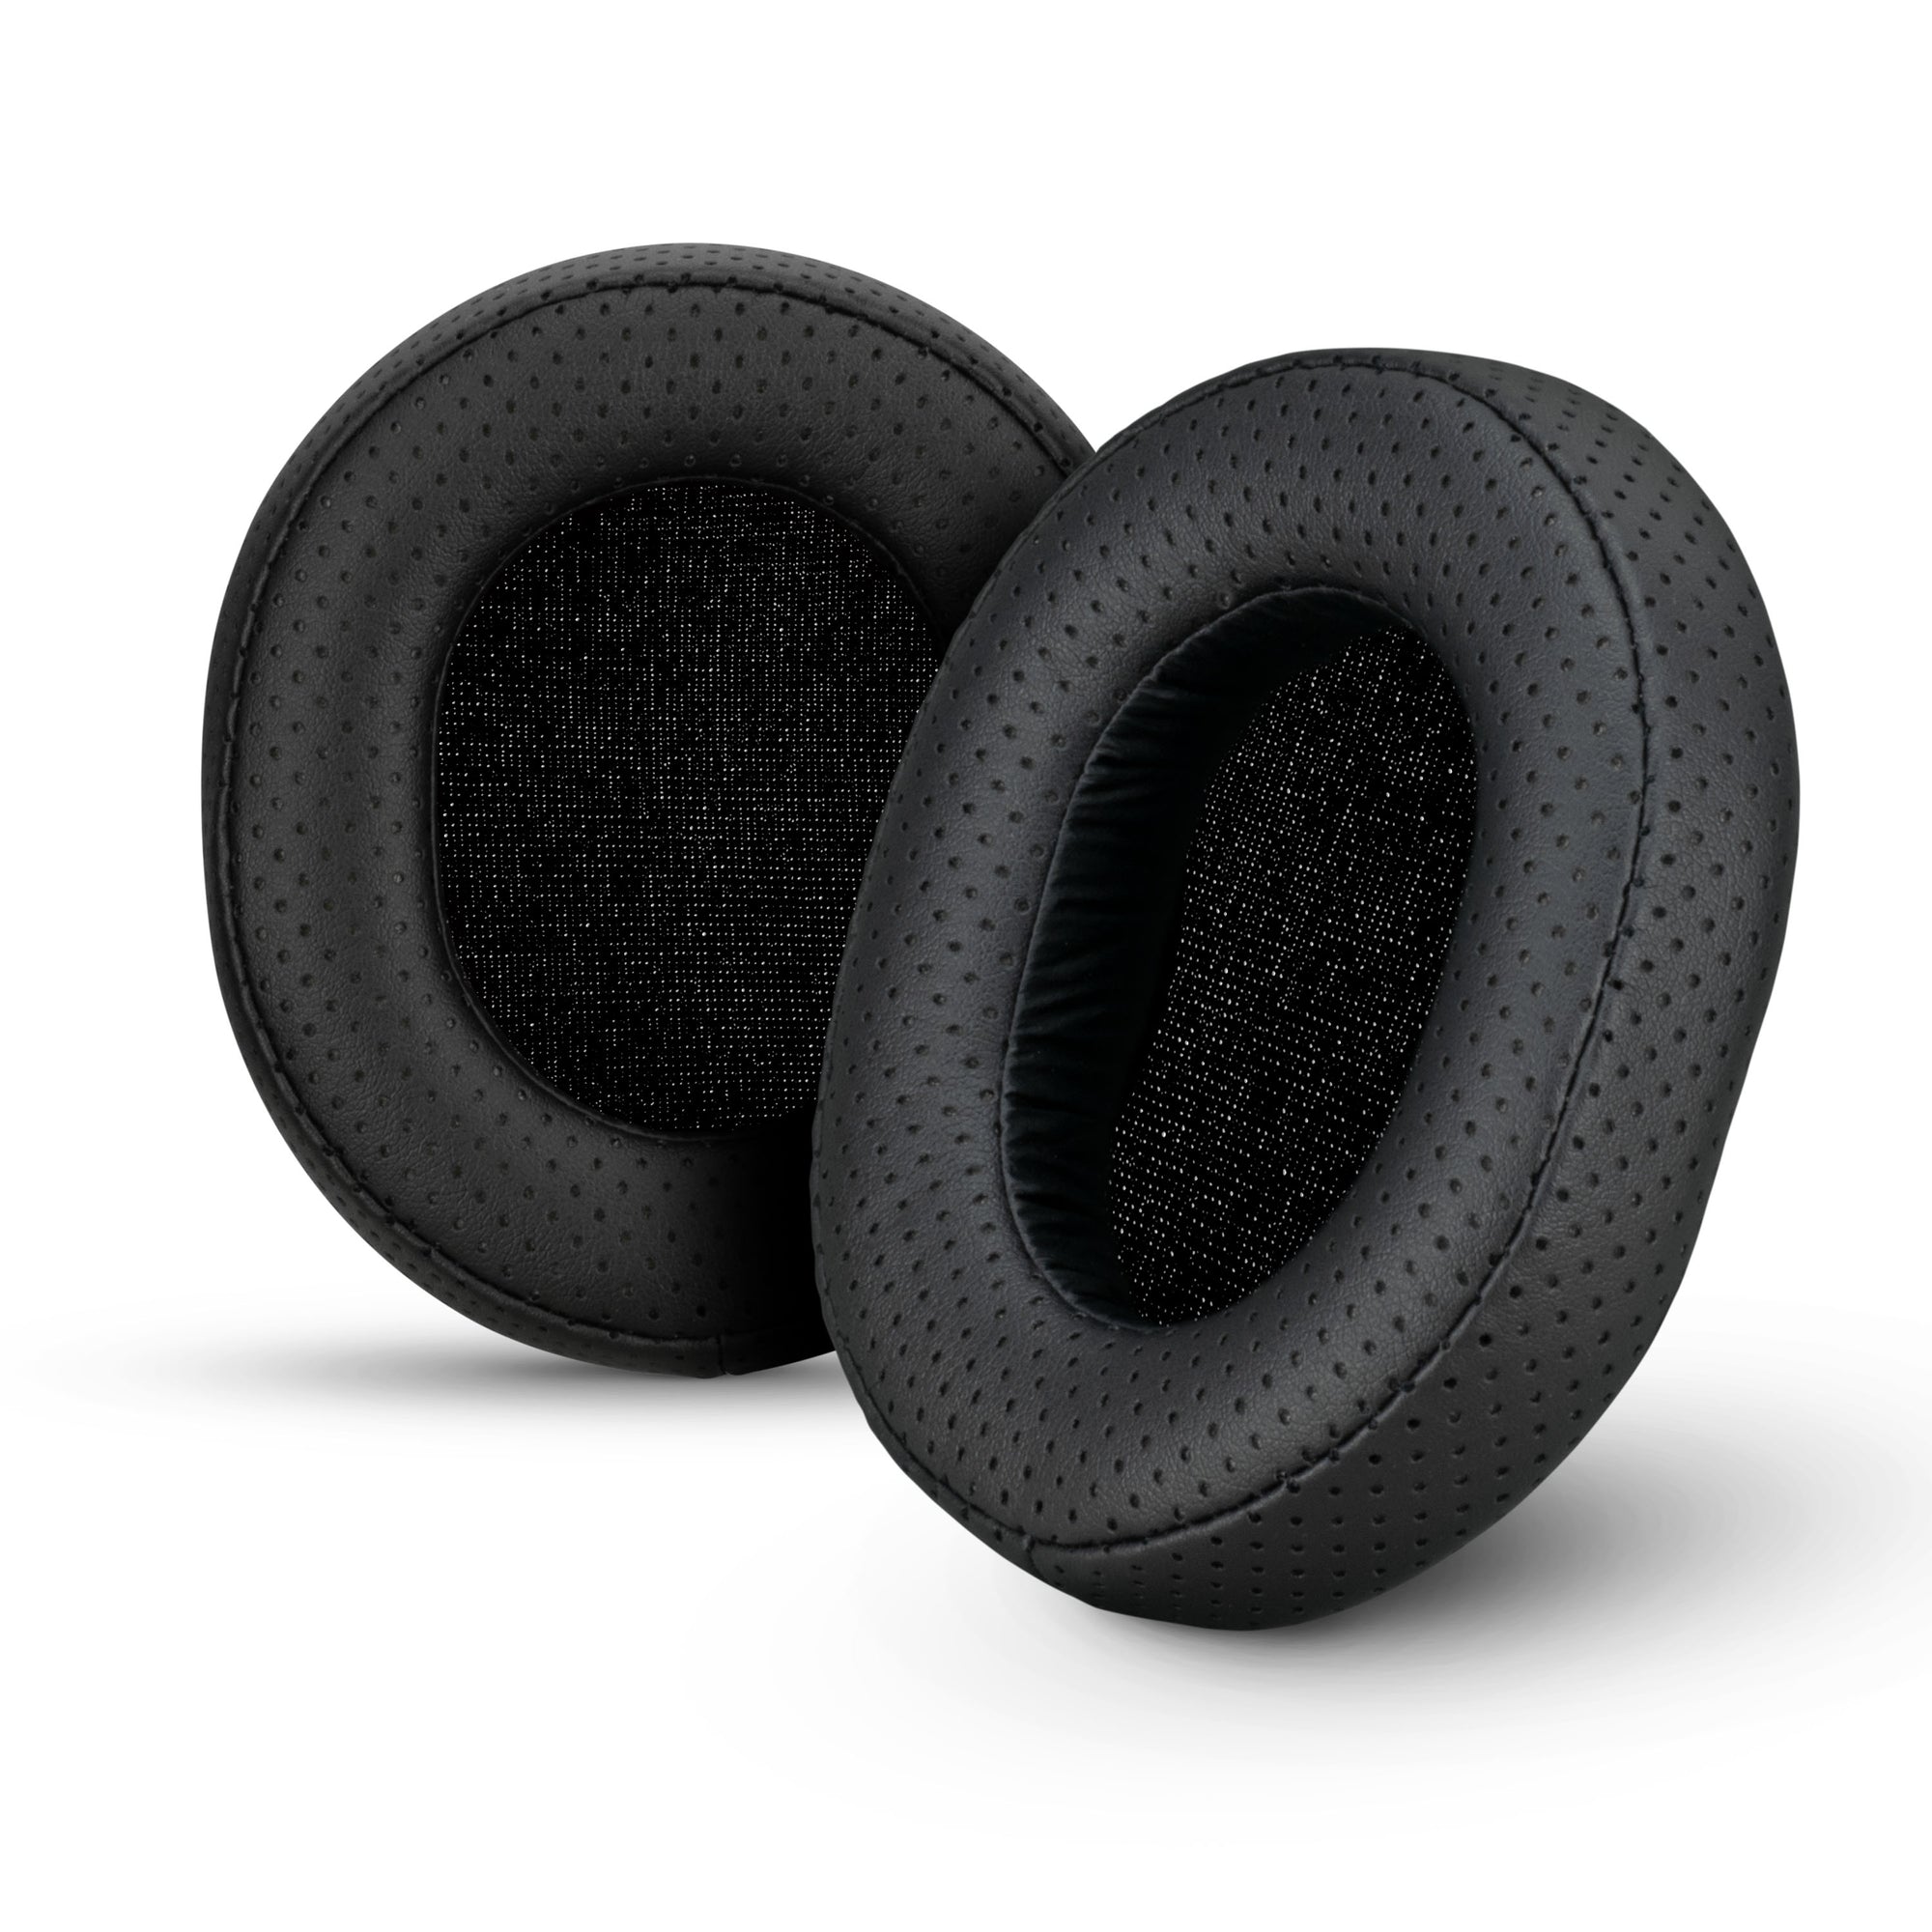 Steelseries Arctis Replacement Perforated Earpads, Upgraded Materials & Memory Foam, Designed For Arctis 1, 3, 5, 7, 9, Pro & Prime (Perf)